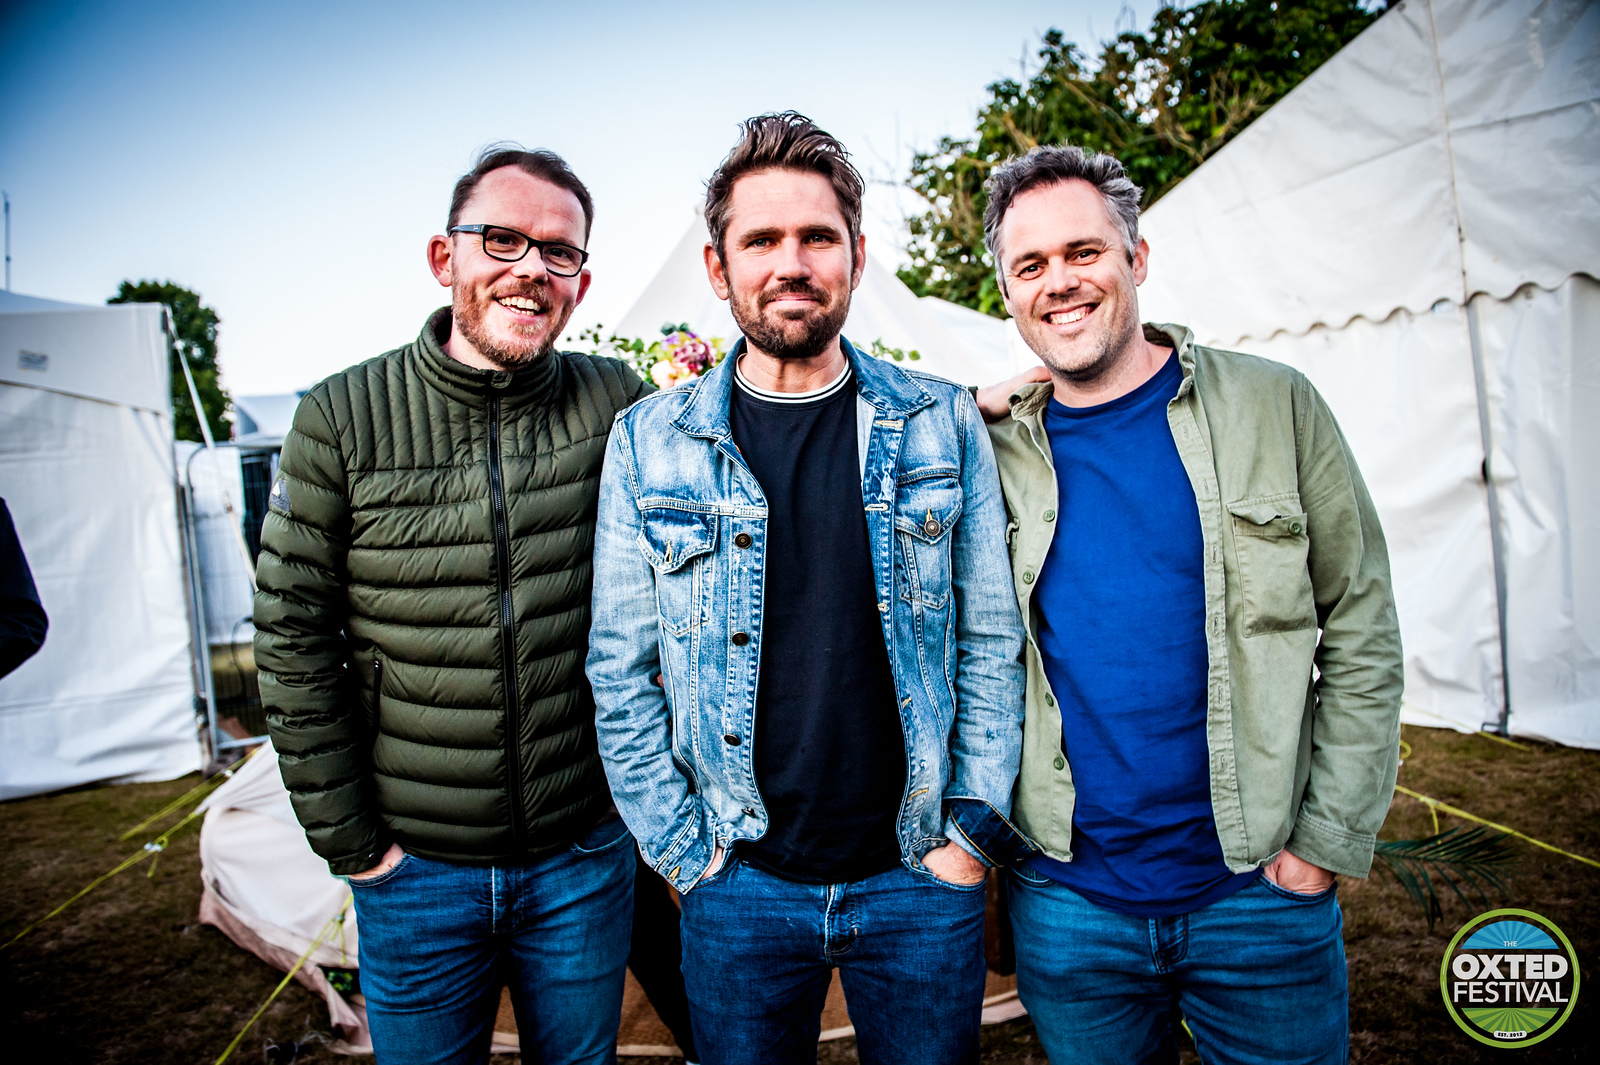 Scouting For |Girls at Oxted Festival 2022